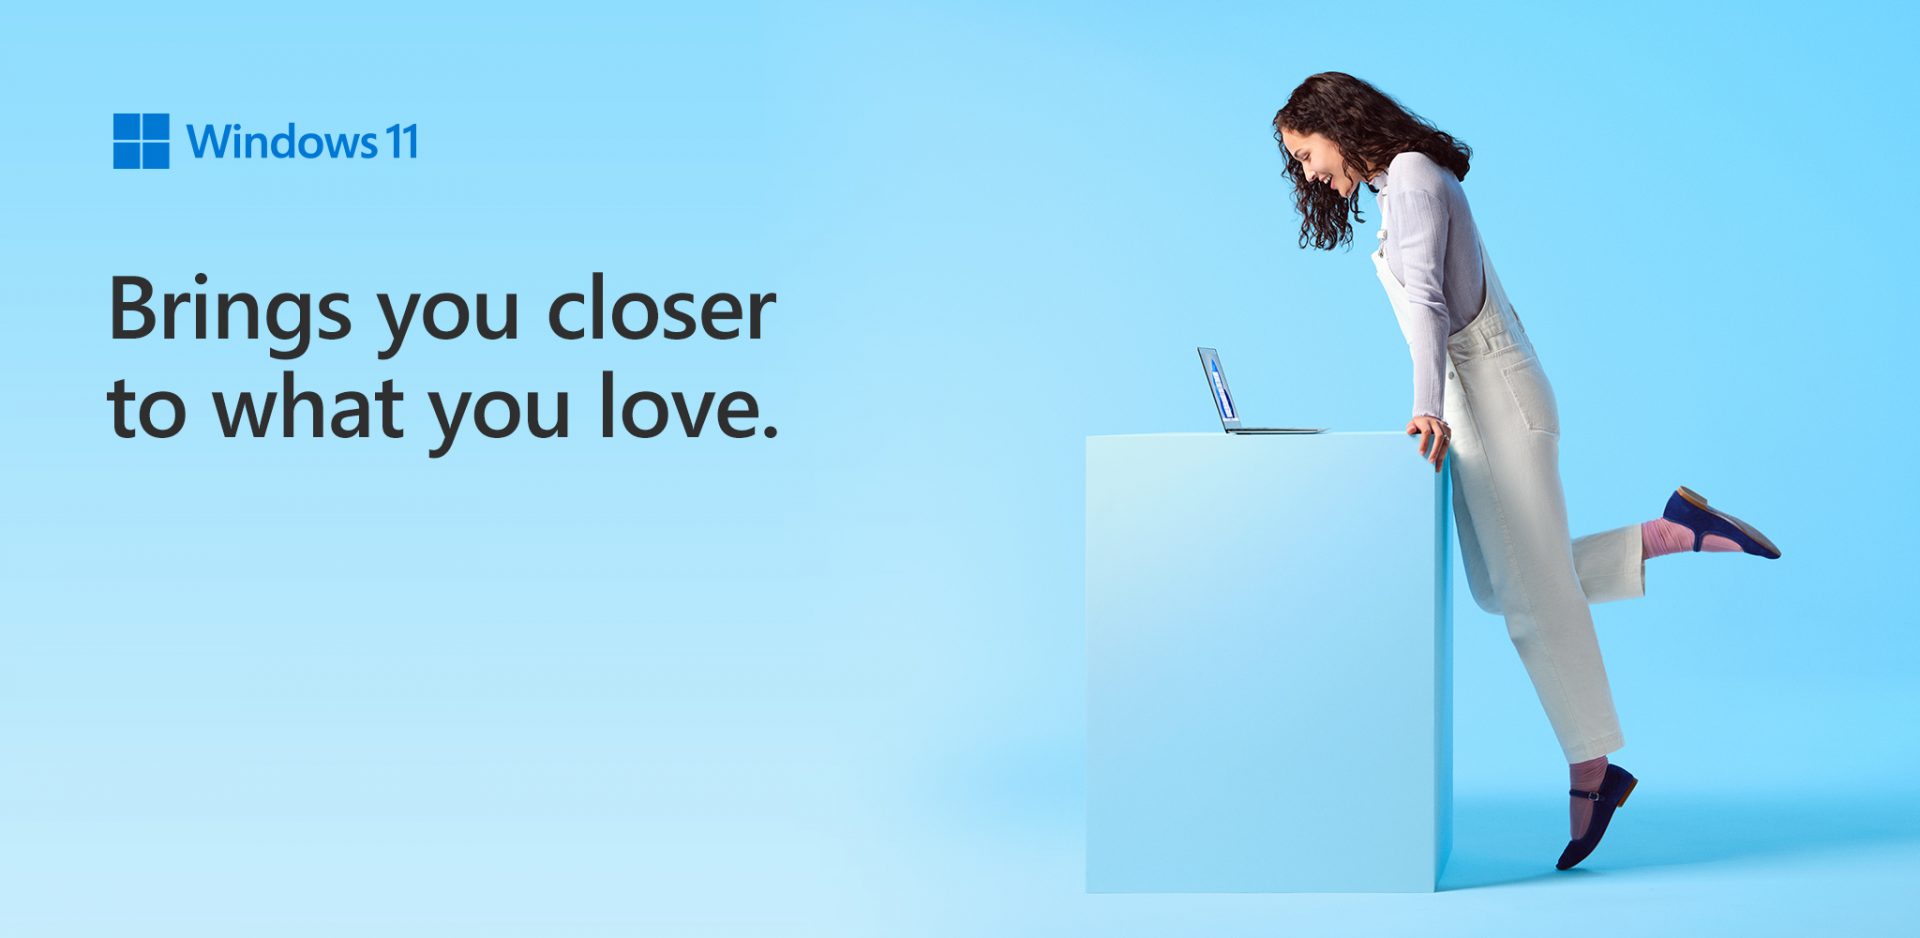 Windows 11 brings you closer to what you love.